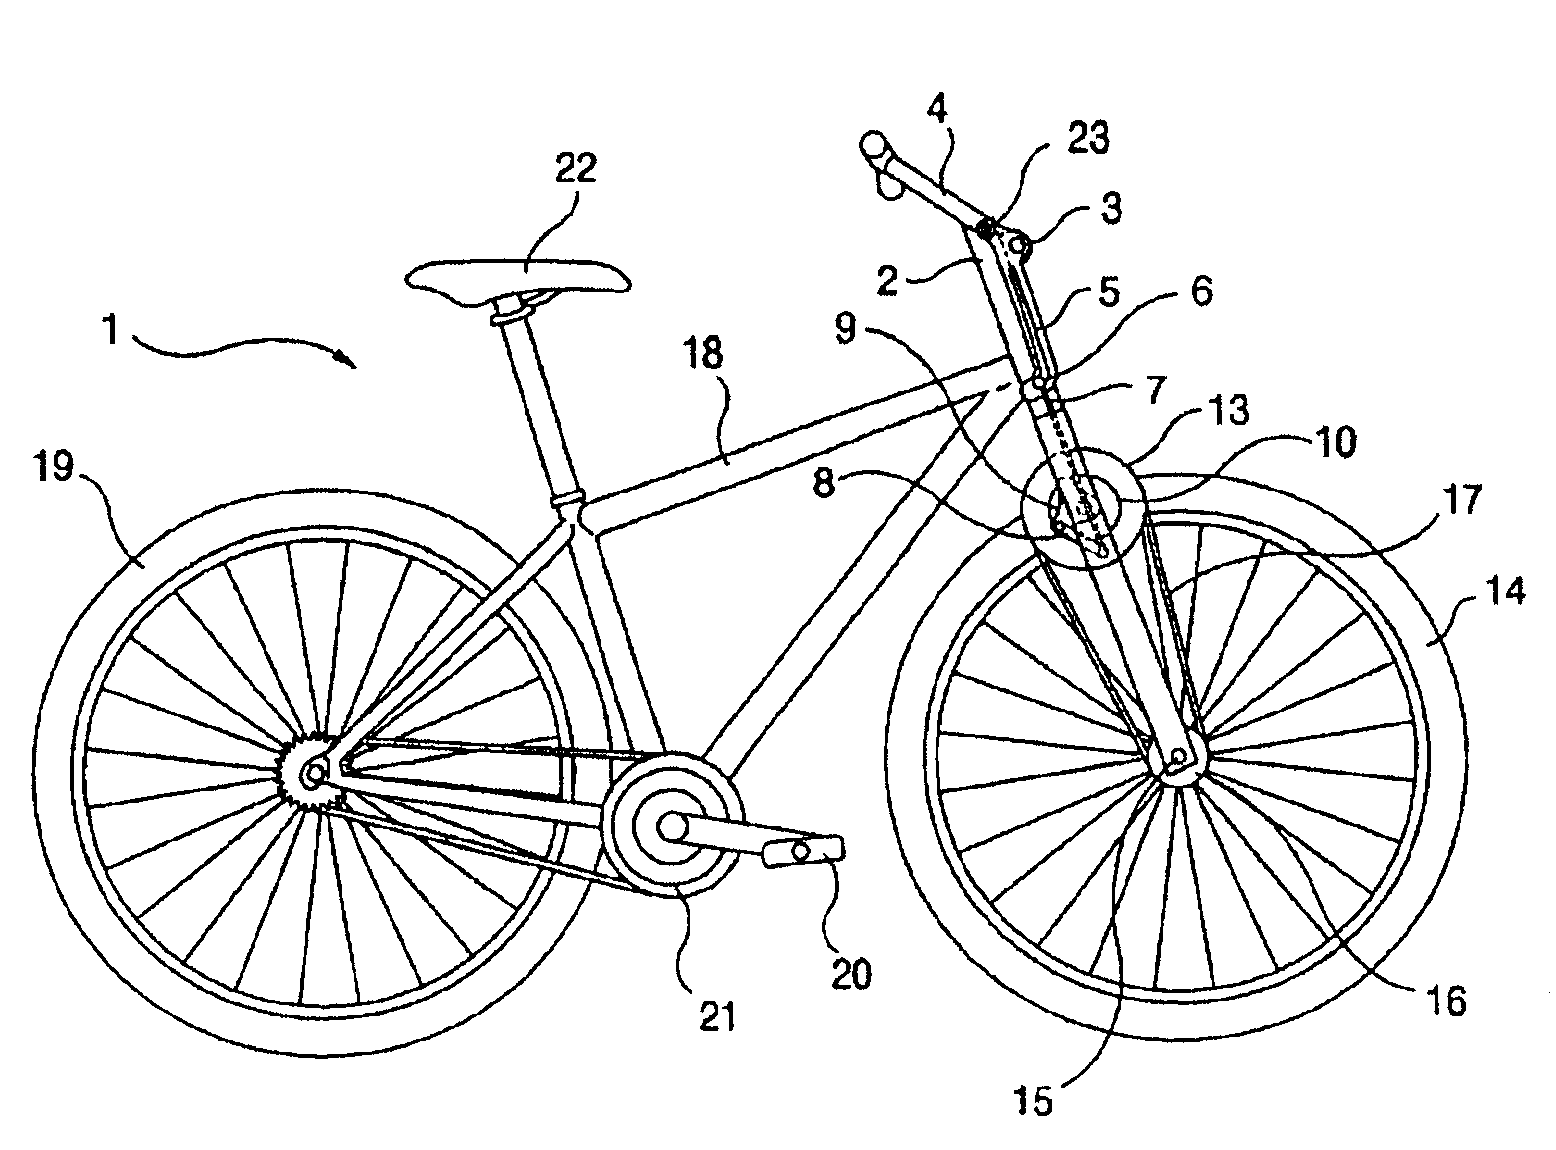 Bicycle of type driven by operation of handle